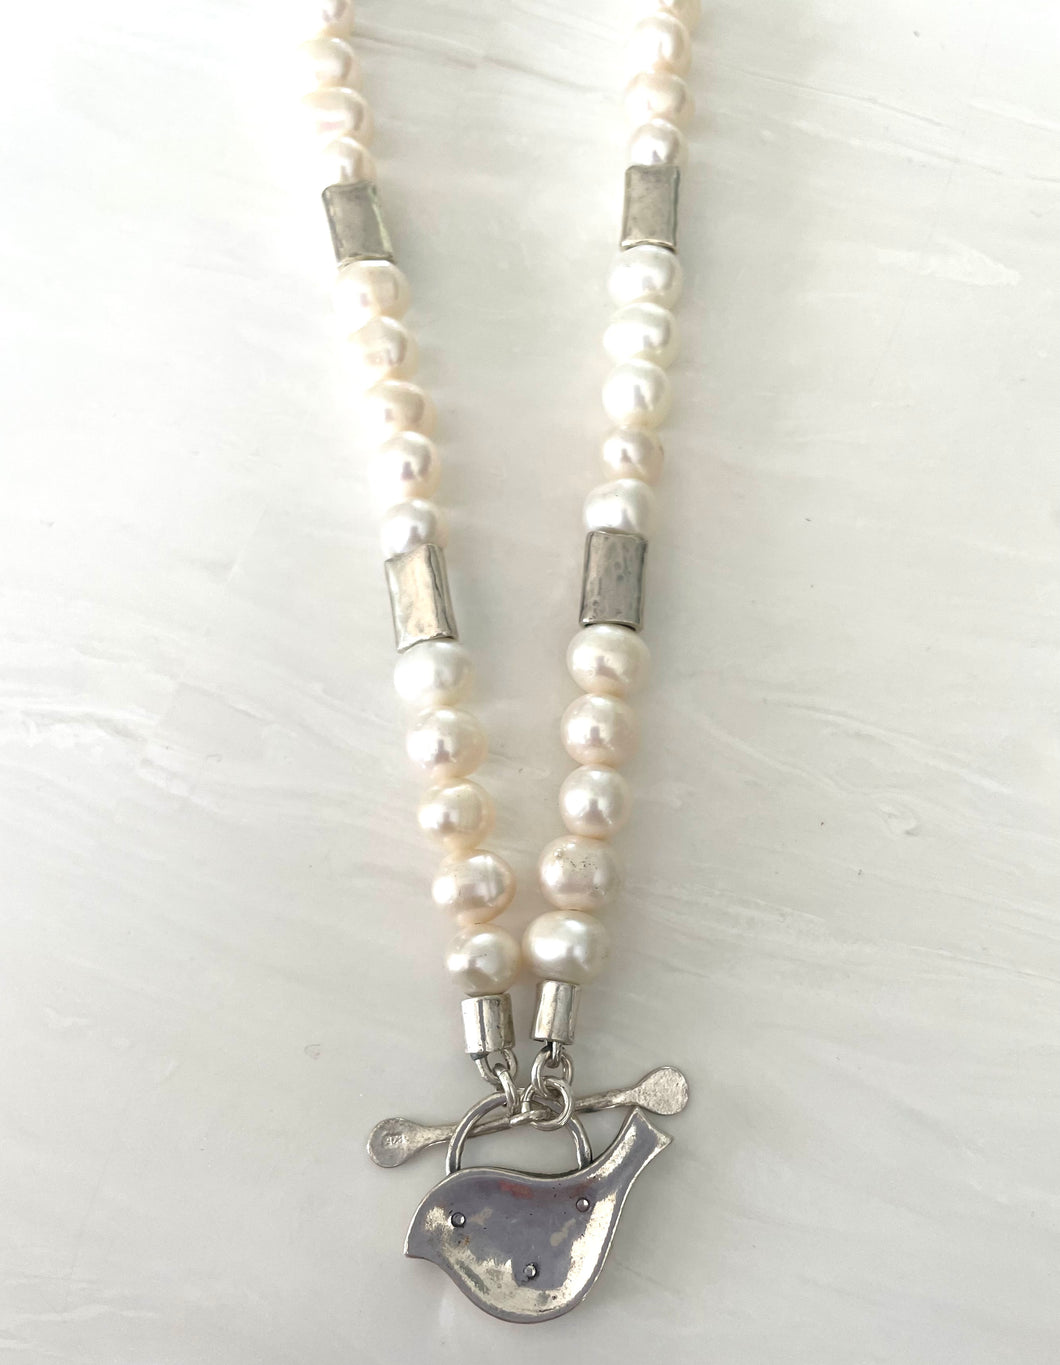 Pearl and Silver hand crafted Necklace with Bird or Fish